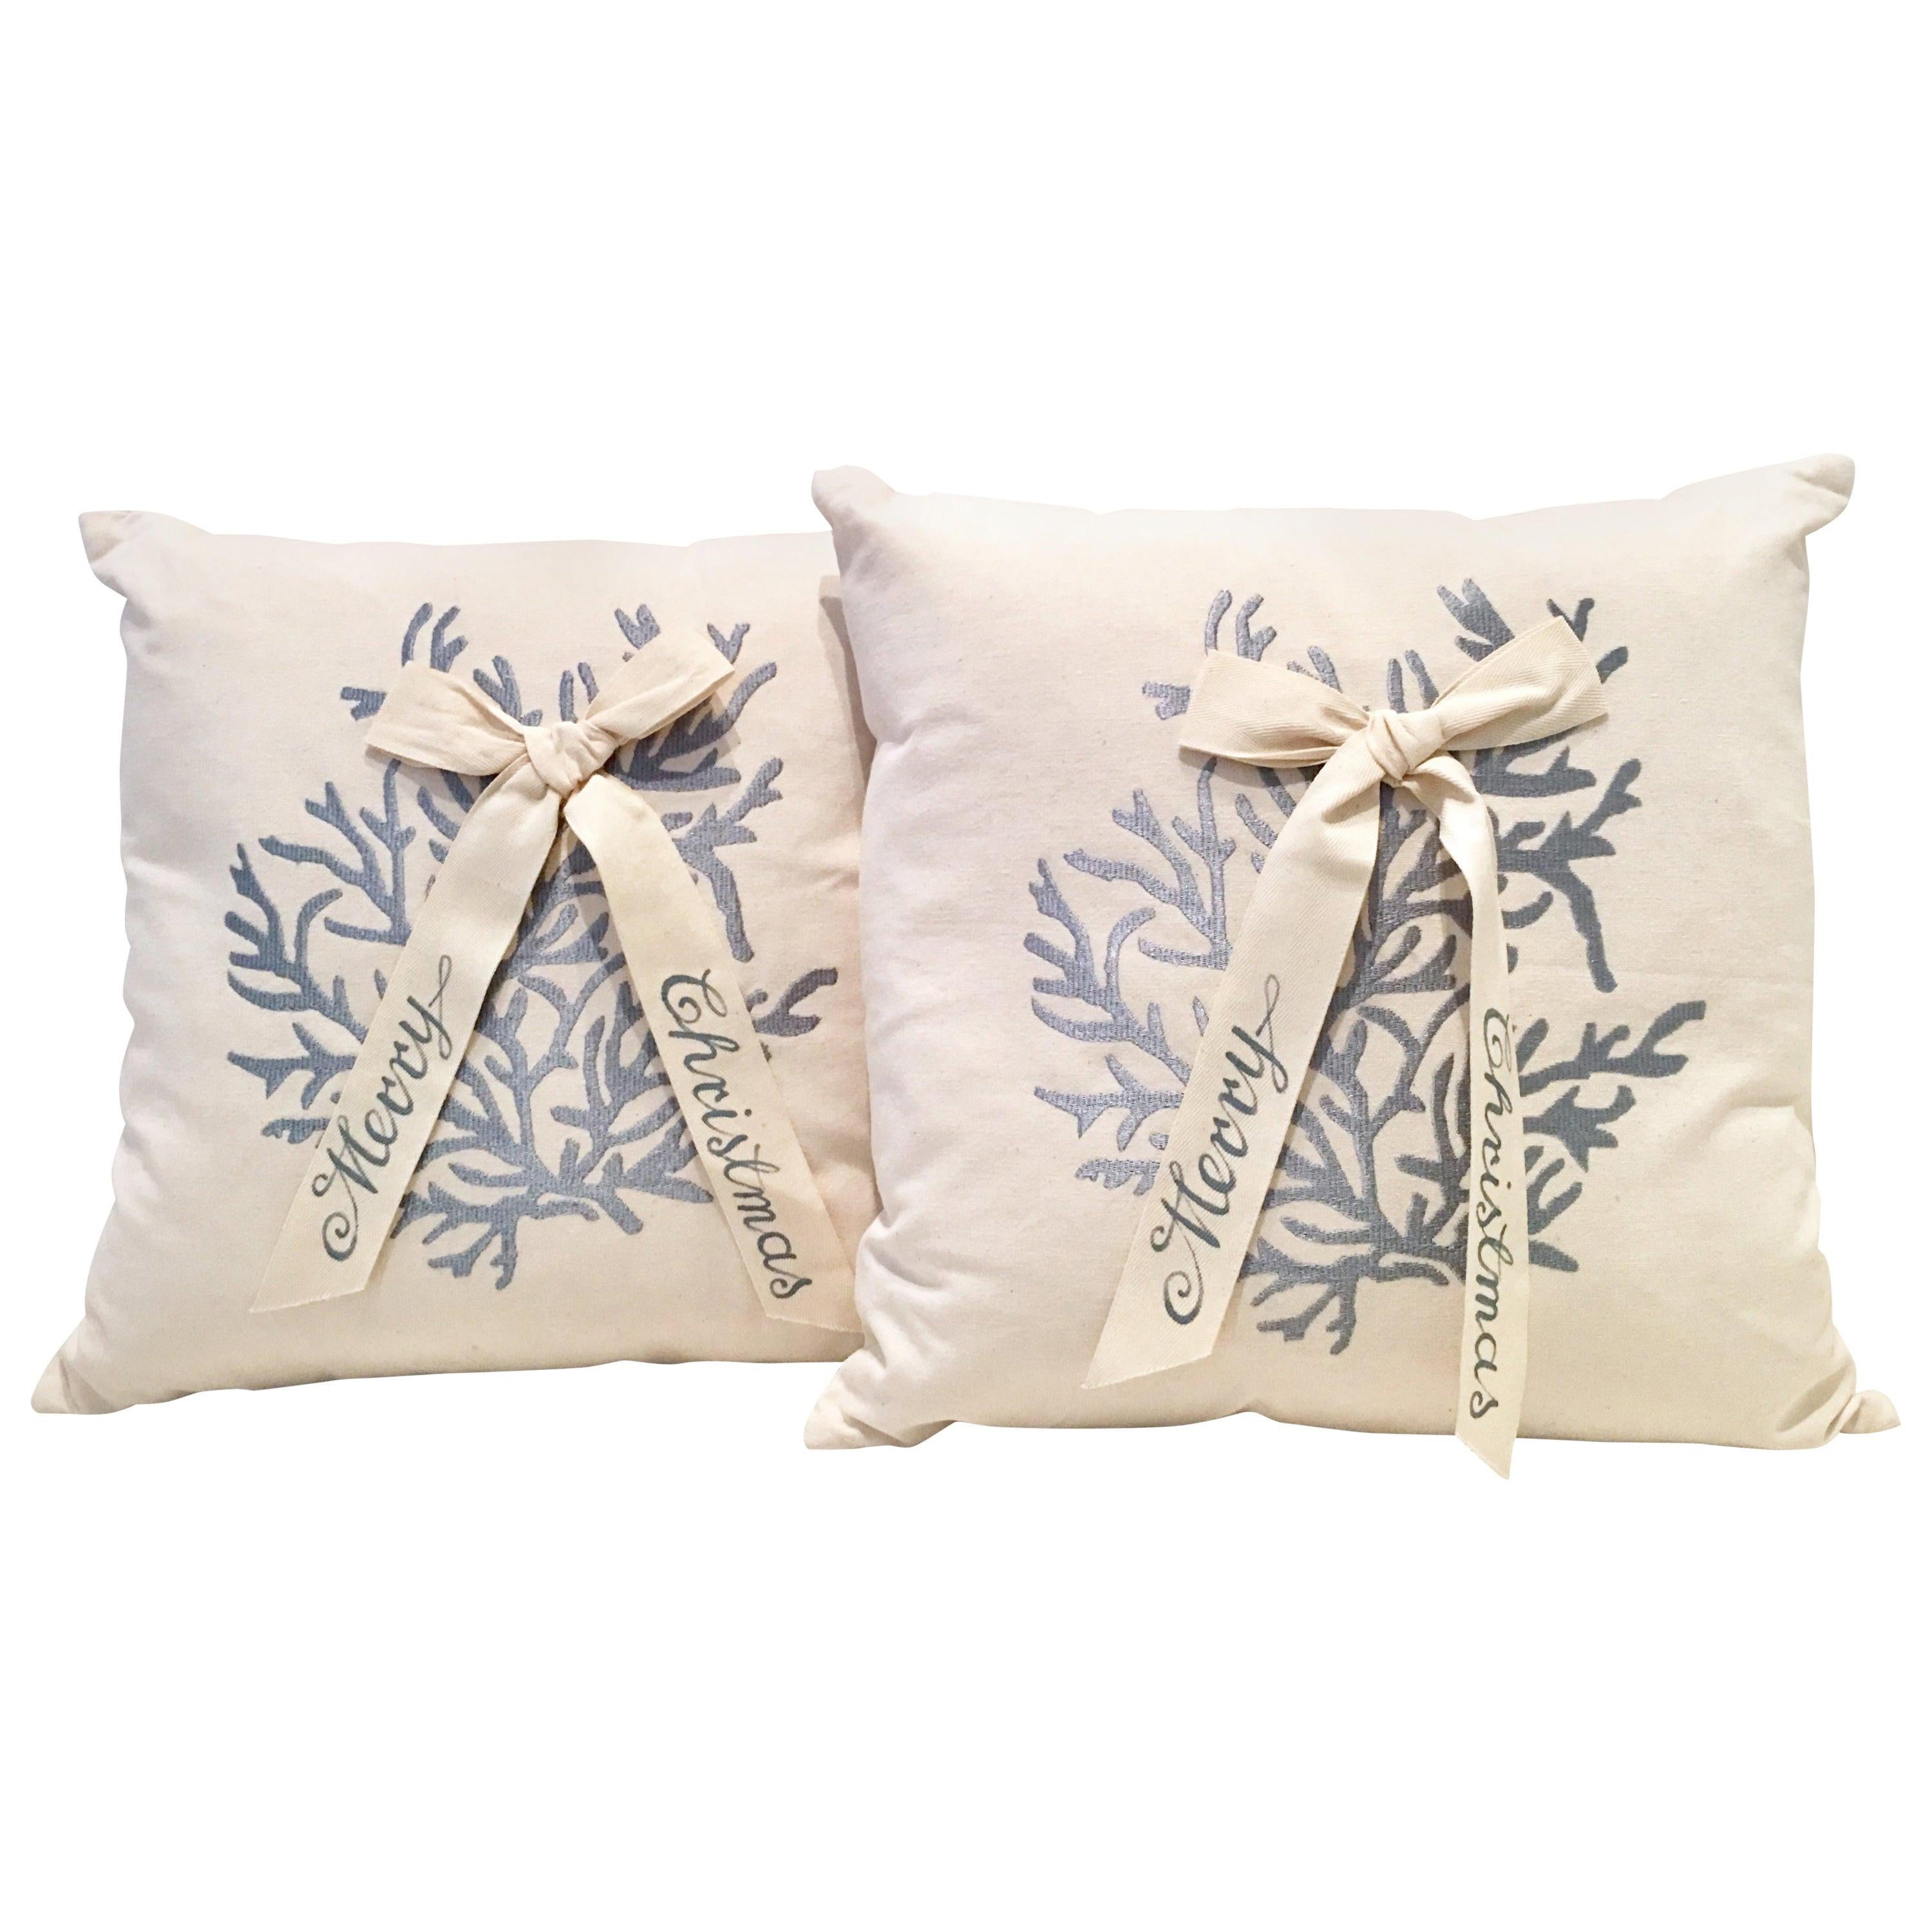 Contemporary and New Pair of "Merry Christmas" Down Filled Decorative Pillows For Sale